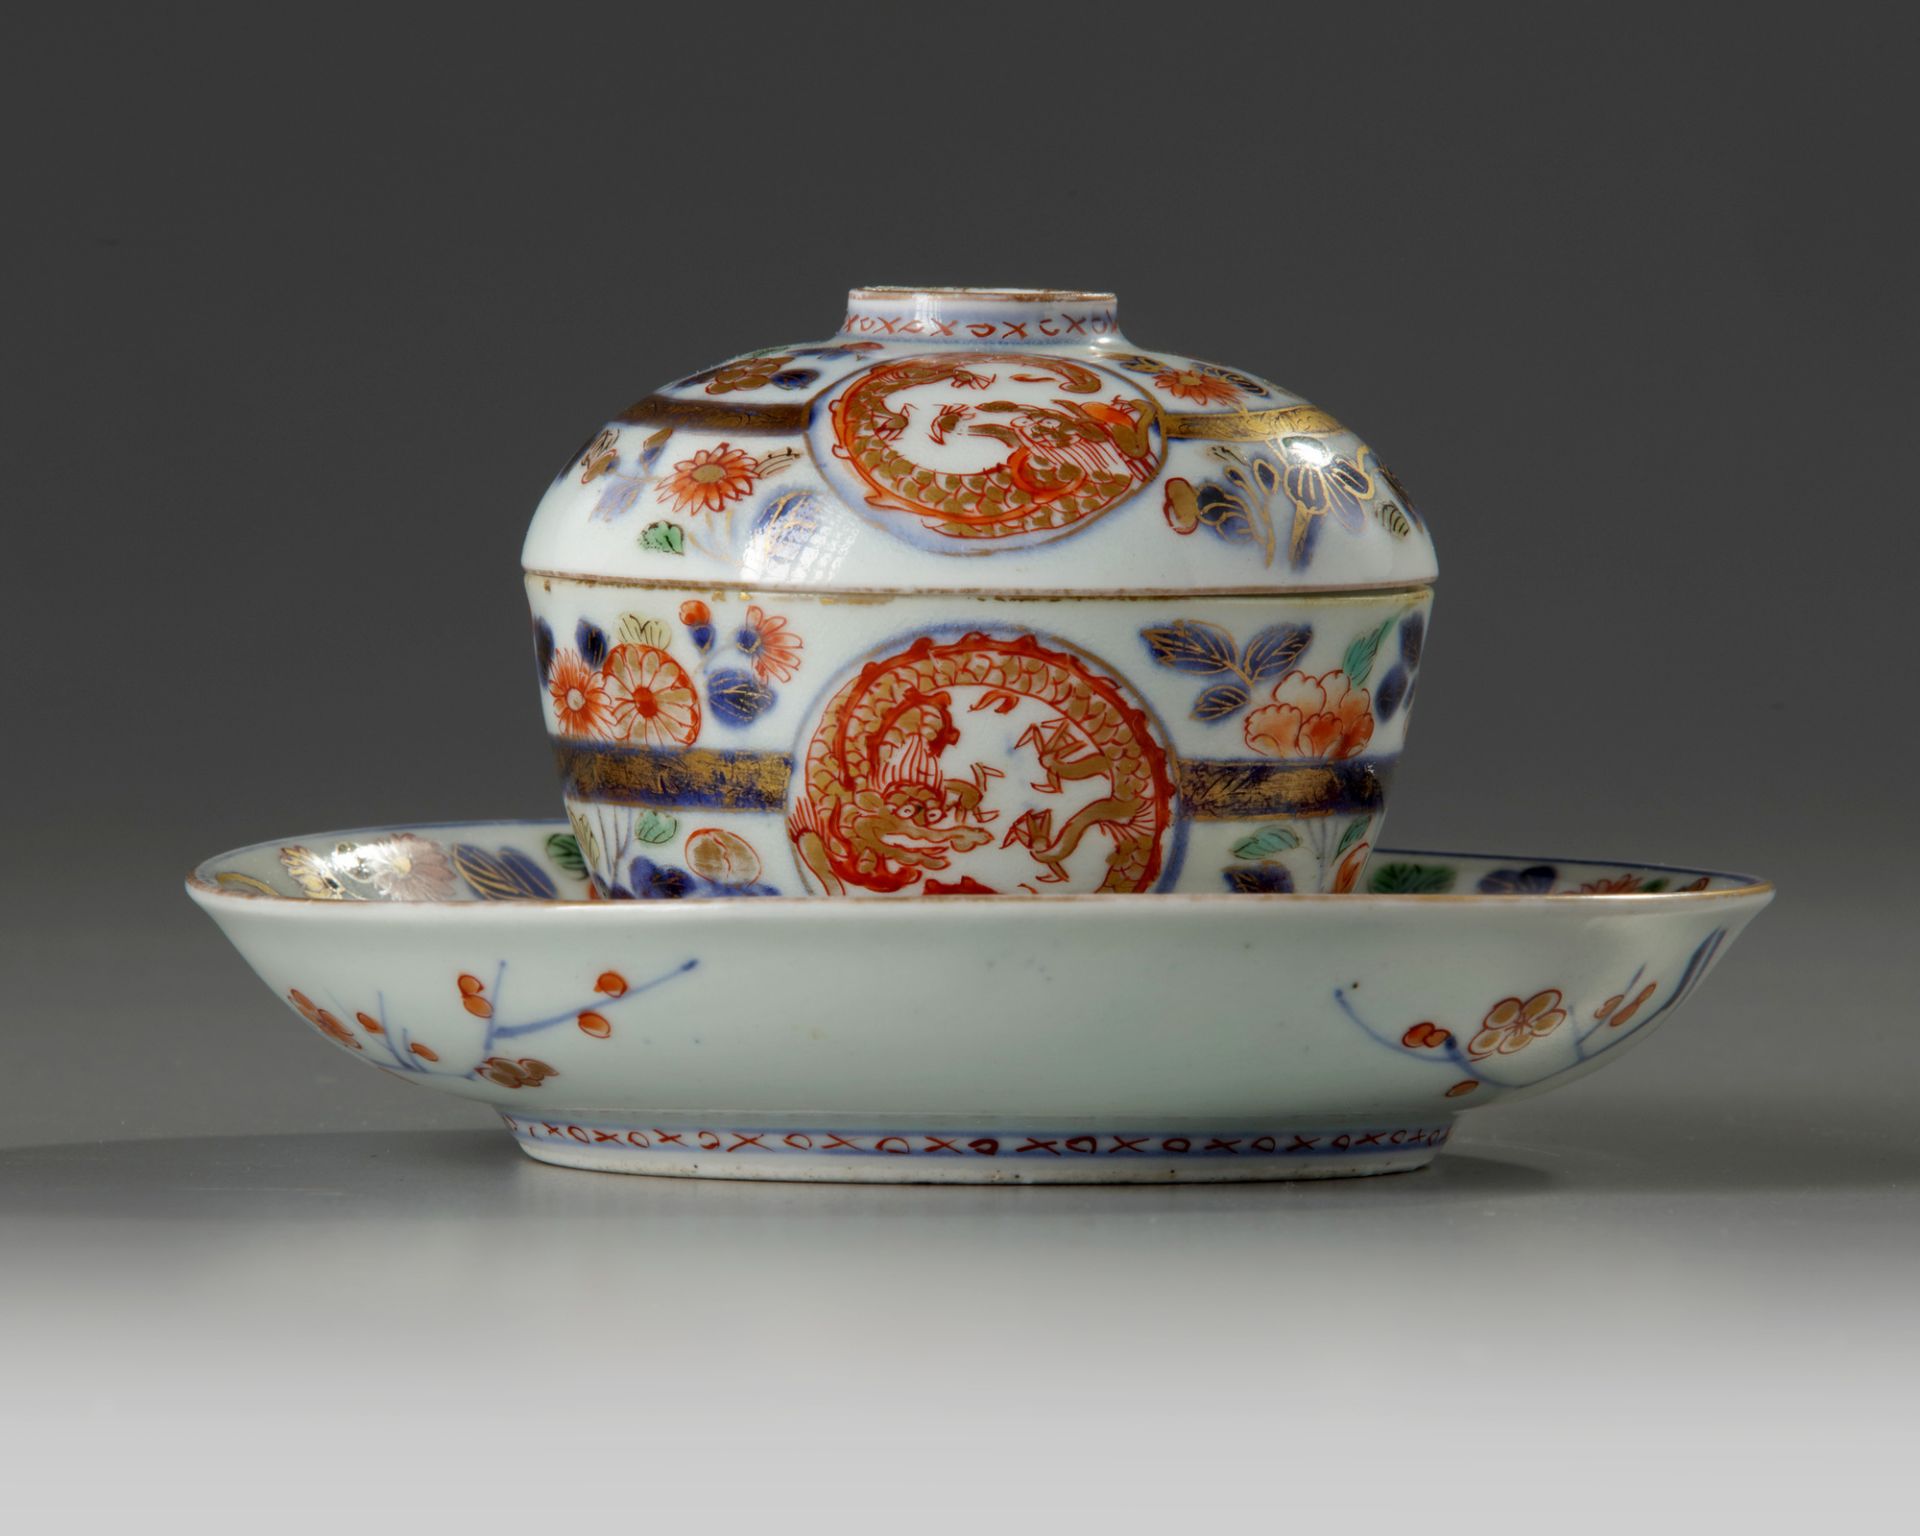 A JAPANESE IMARI TEACUP WITH COVER AND SAUCER, 17TH CENTURY - Image 2 of 6